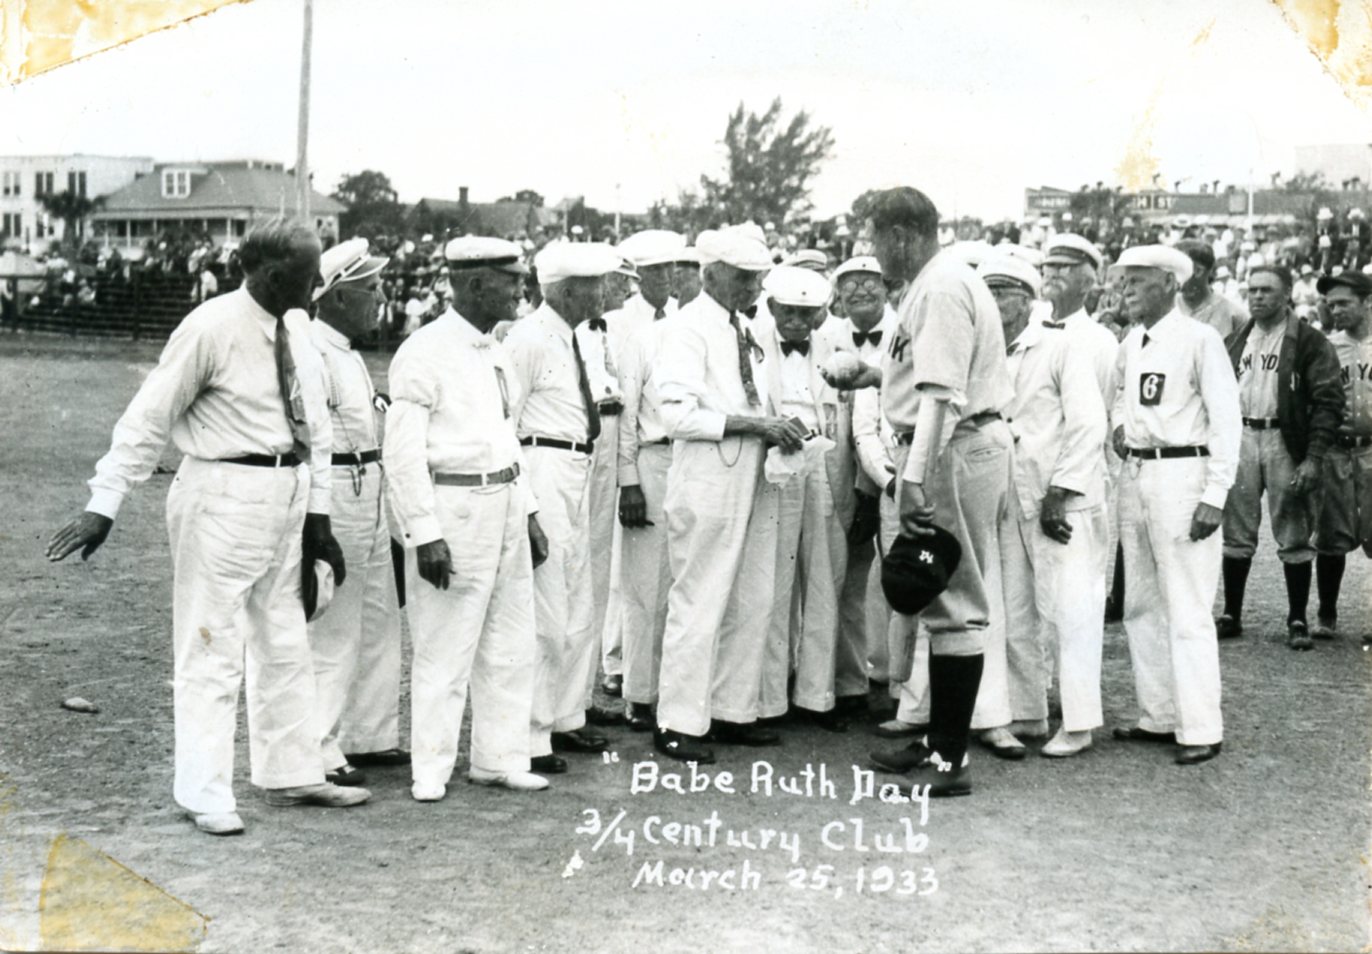 Babe Ruth Day. Photo courtesy of the St. Petersburg Museum of History.